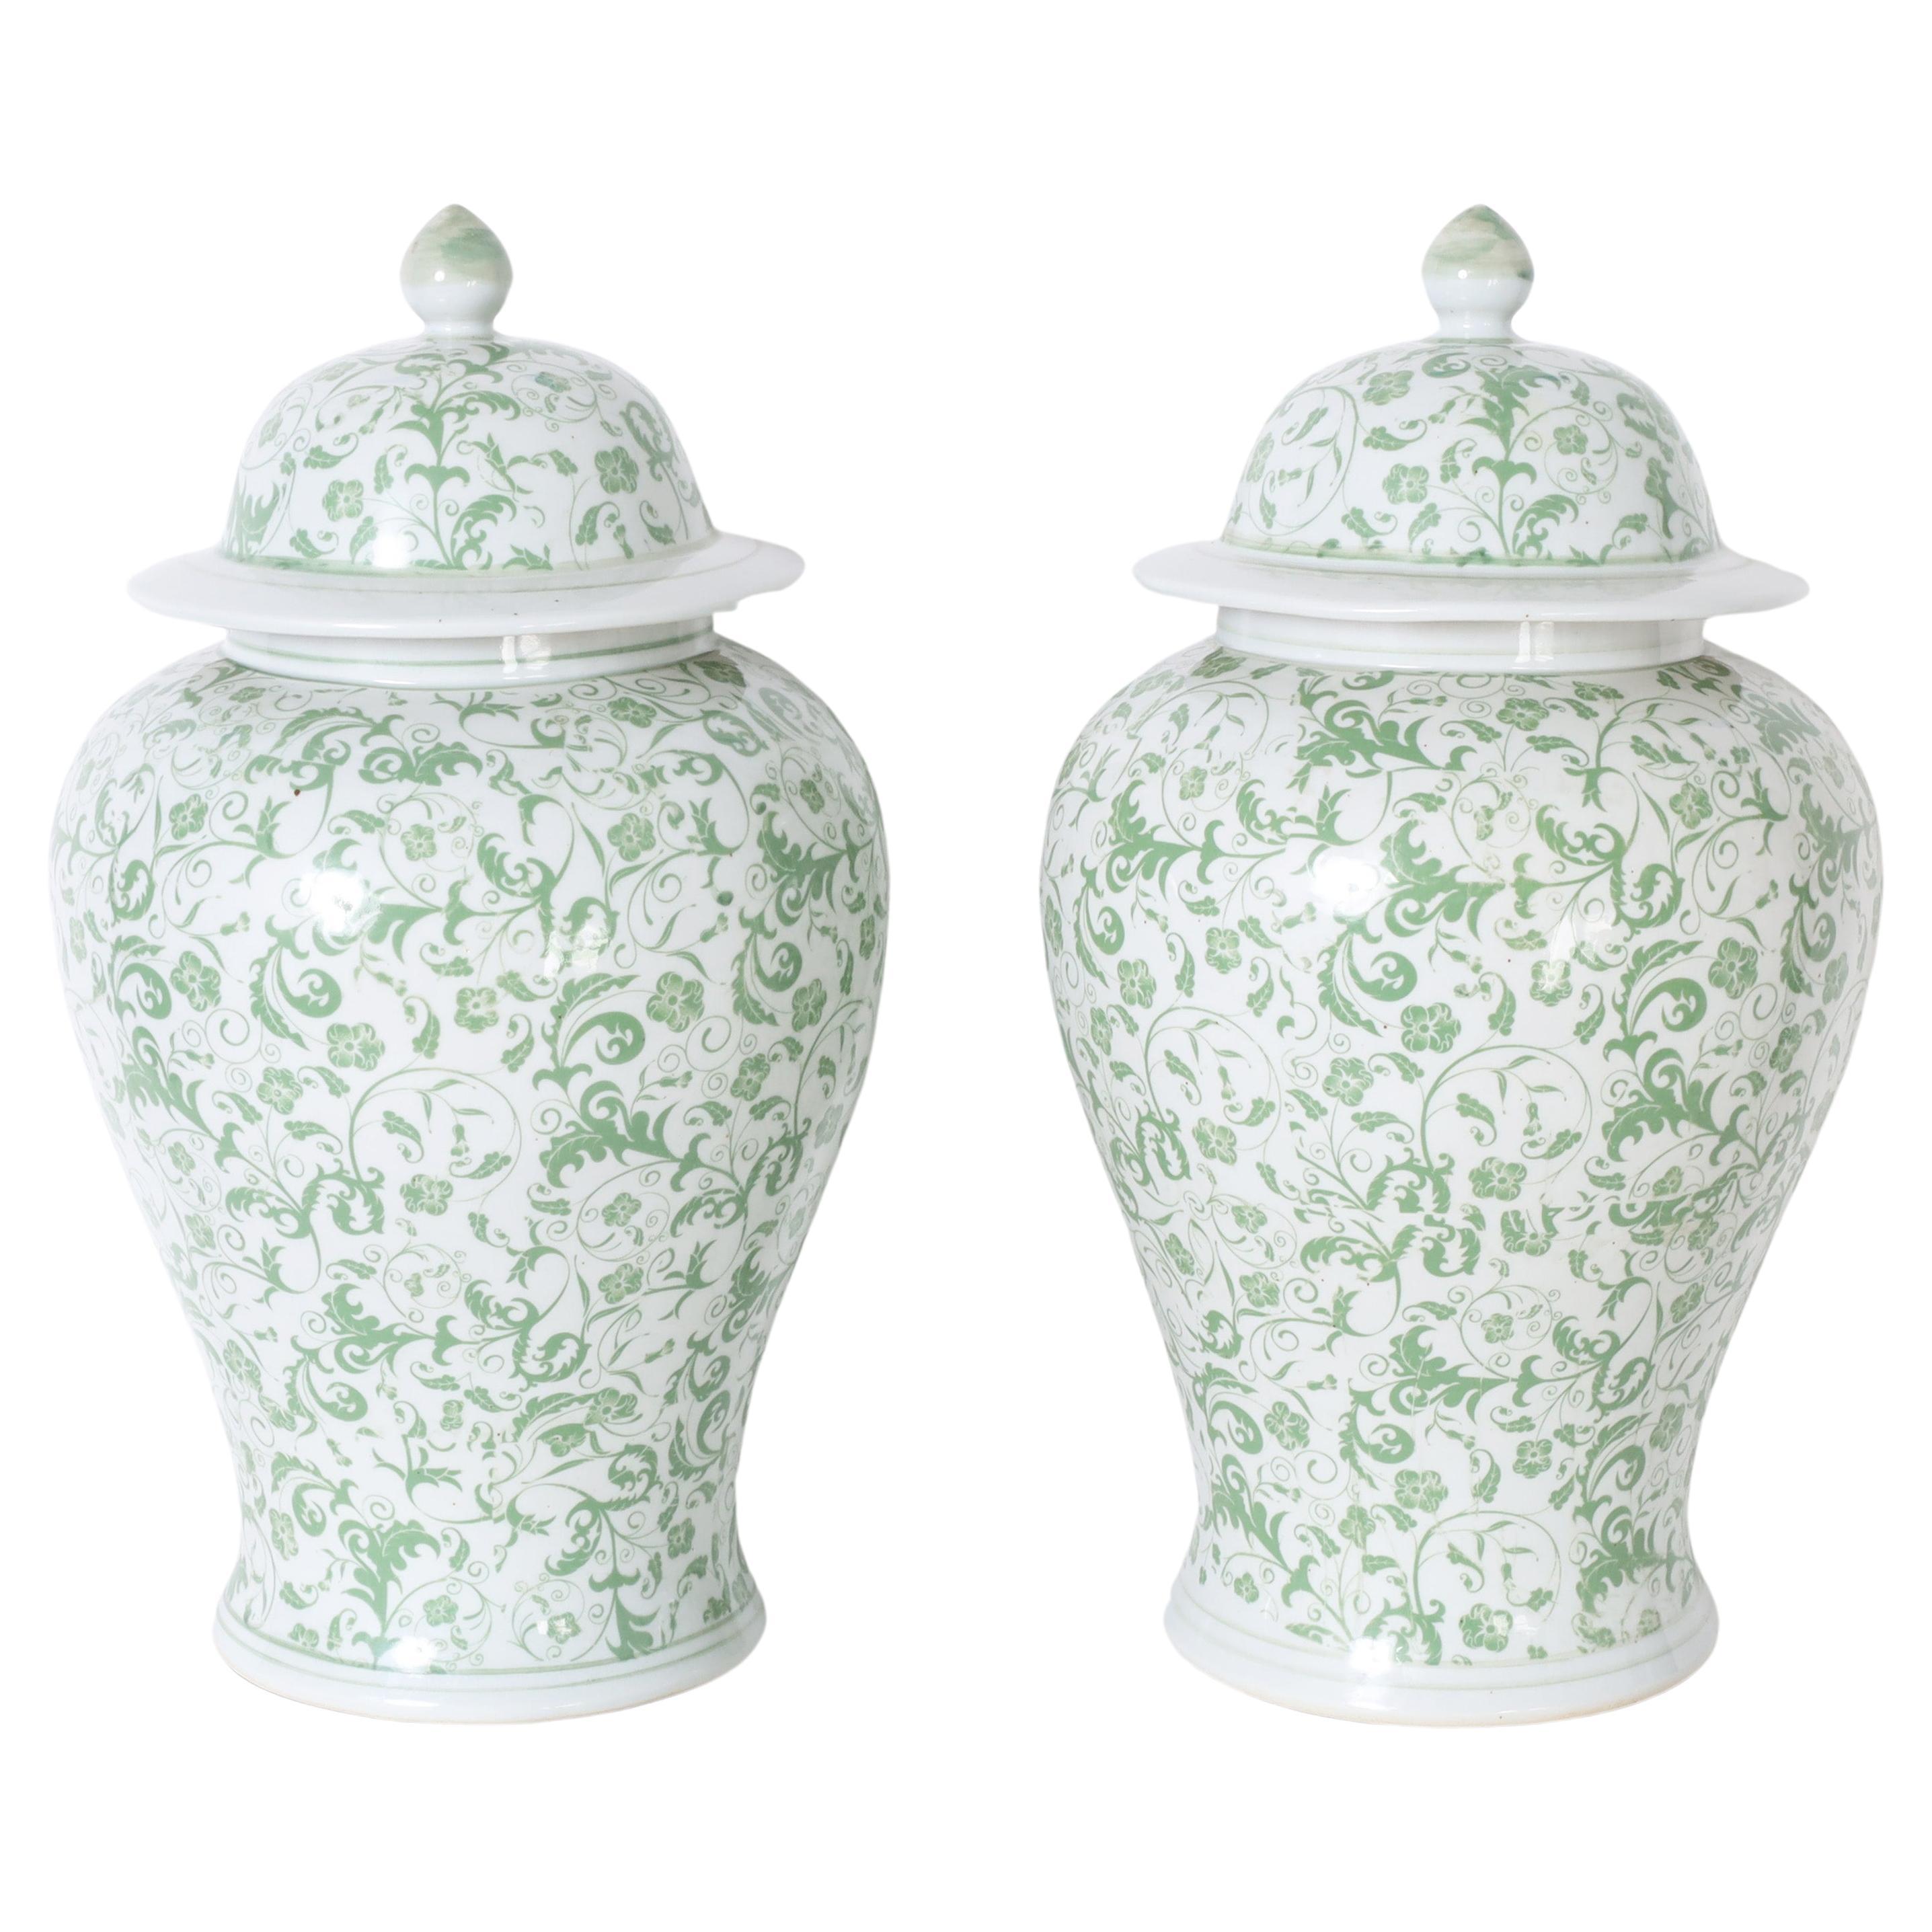 Pair of Green and White Lidded Urns or Jars